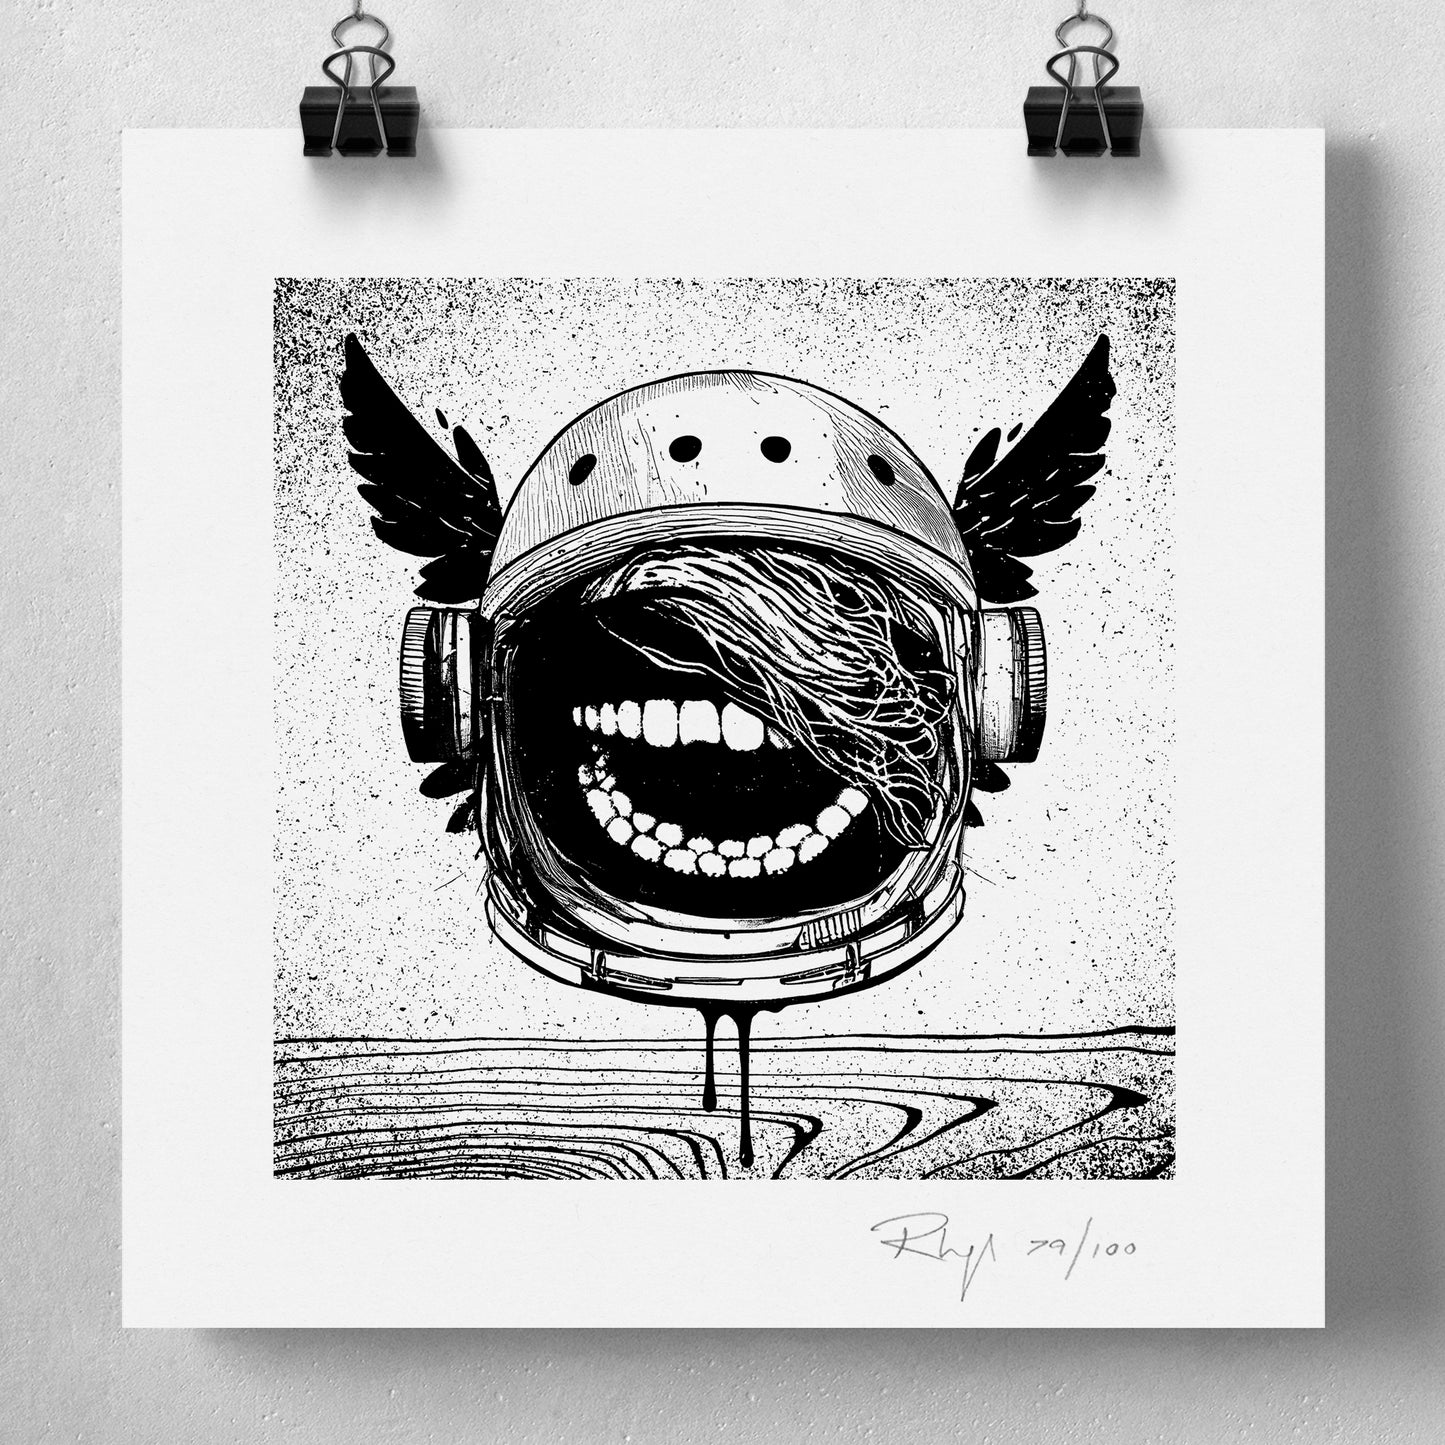 Smile: 8" Signed Limited Edition Print